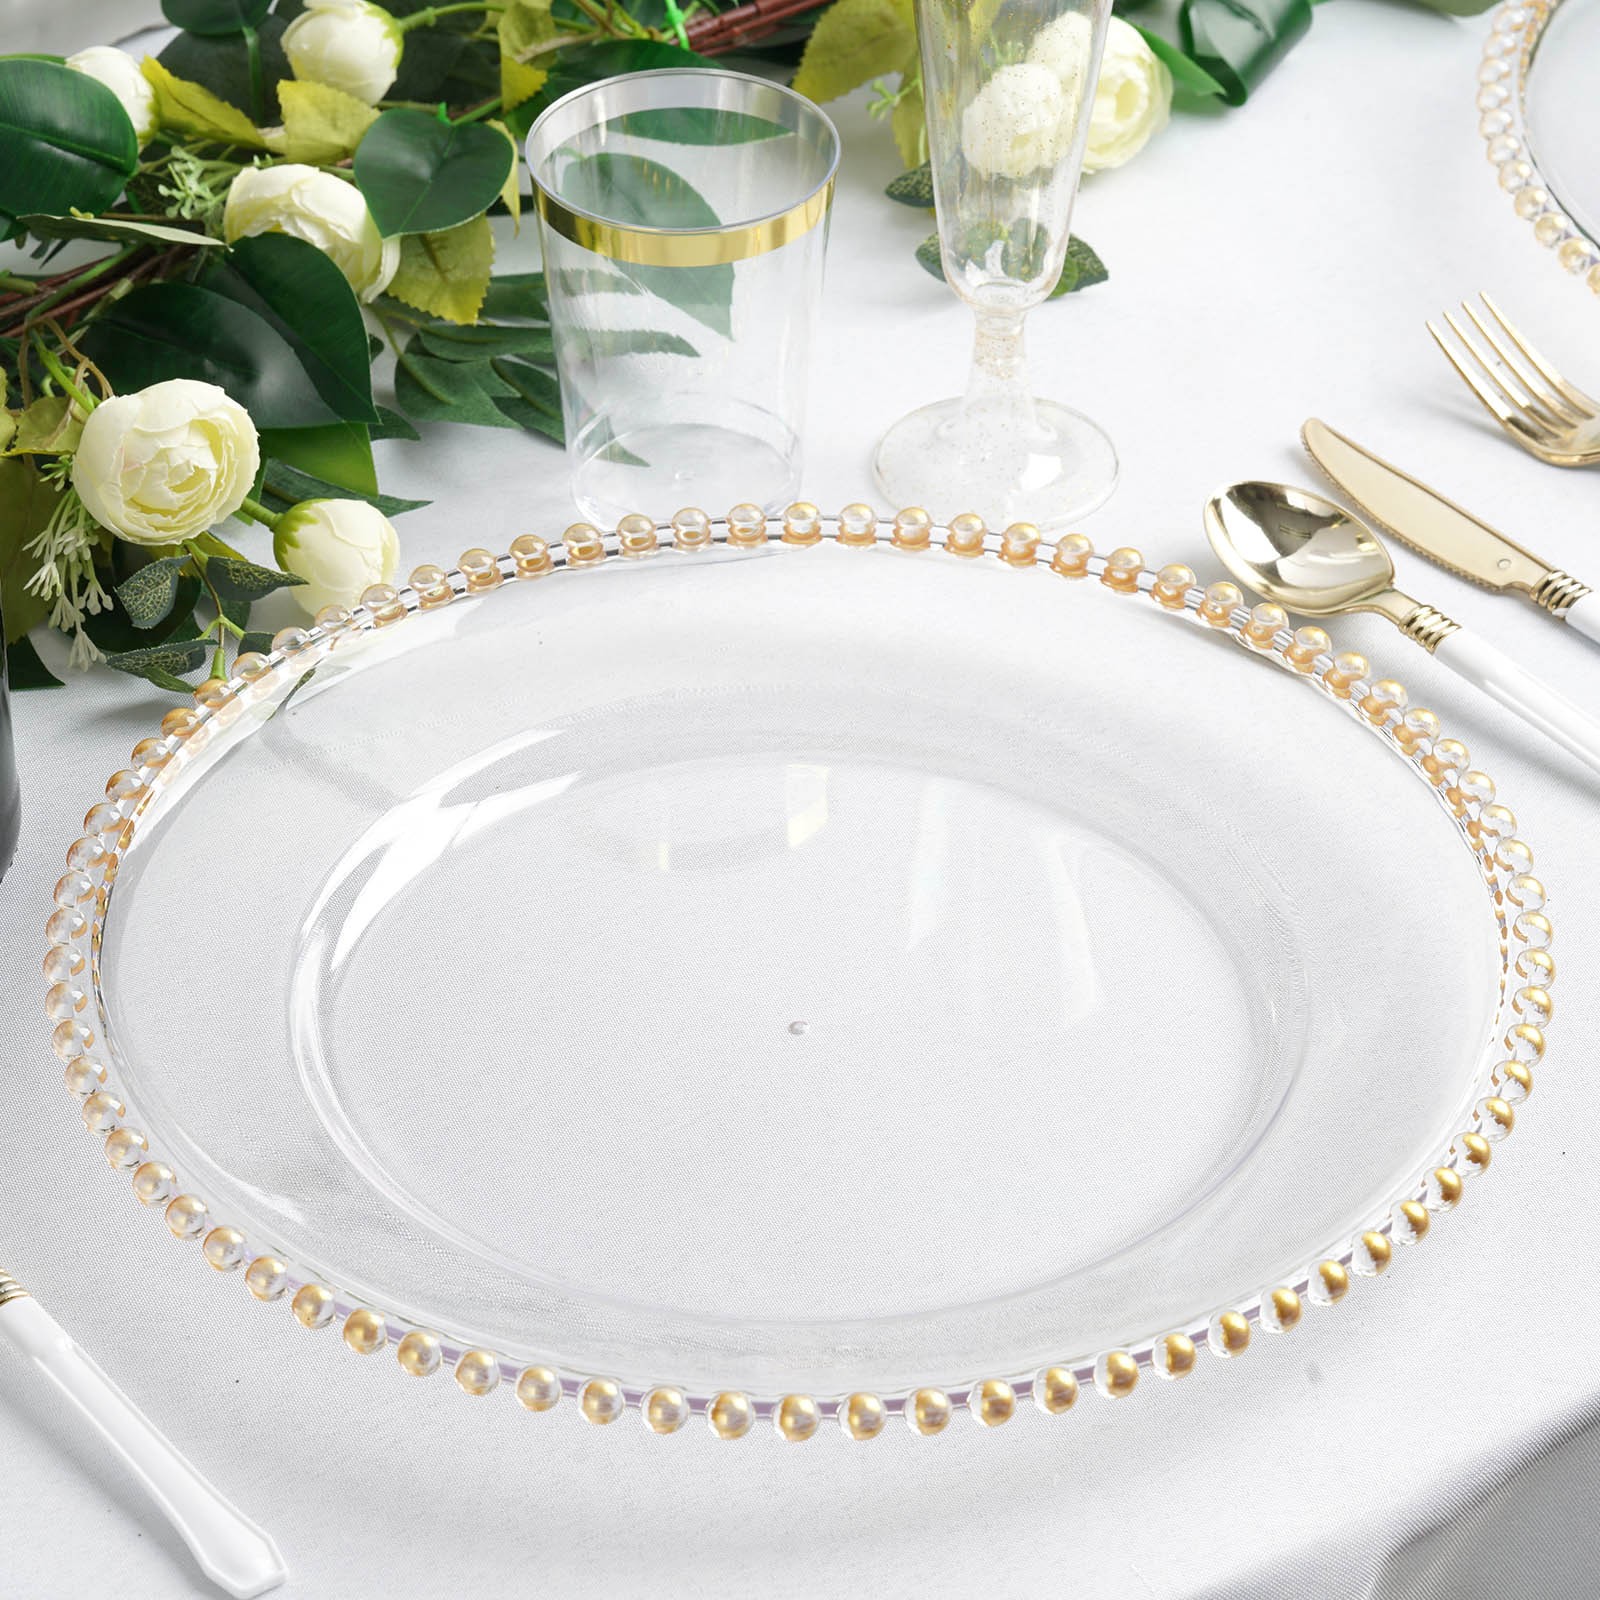 TigerChef Clear Acrylic Plastic Charger Plate With Gold Beaded Rim 12